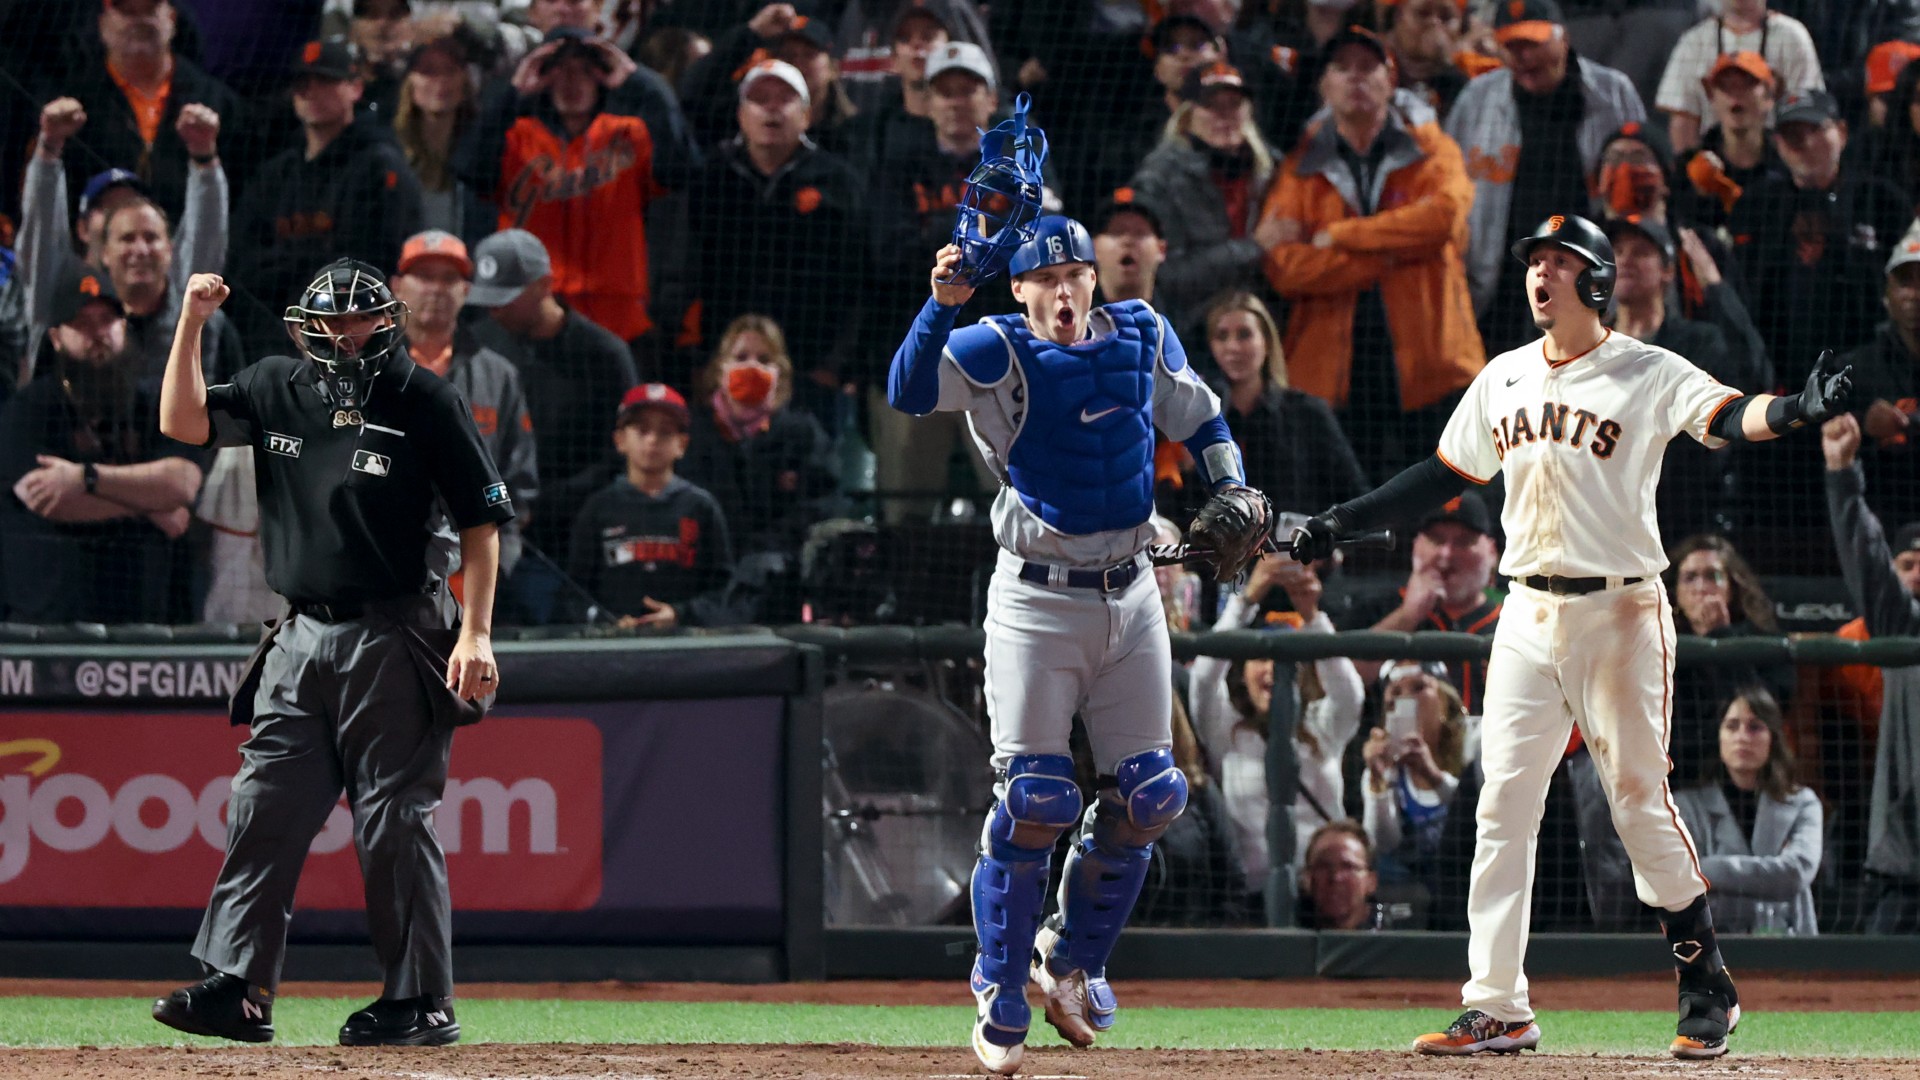 The Giants’ season ends with a brutal check-swing in NLDS Game 5 against the Dodgers